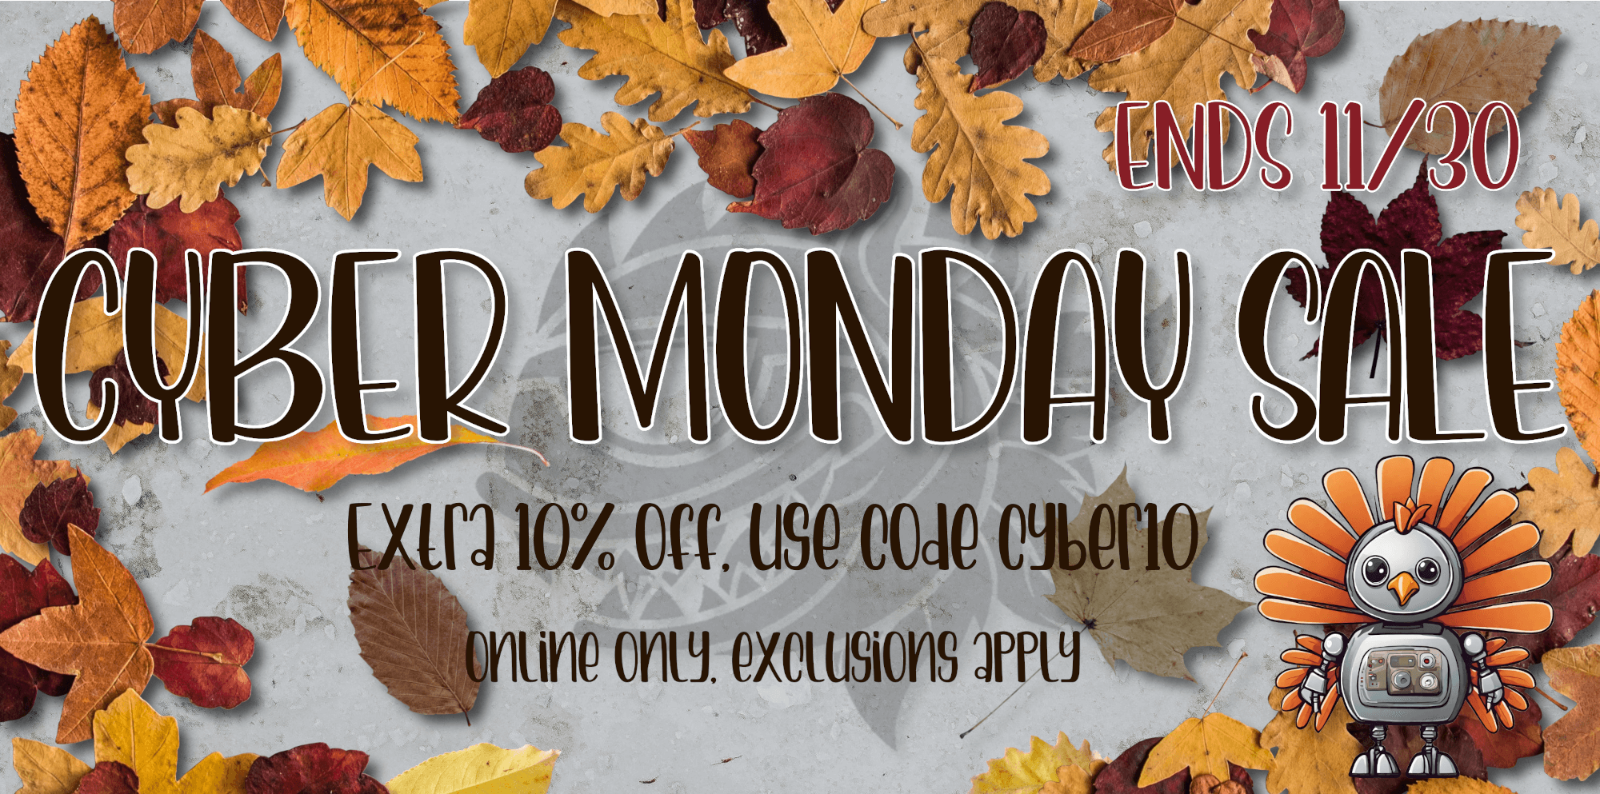 Cyber Monday Sale Extra 10% off, use code cyber10.  Online only, exclusions apply